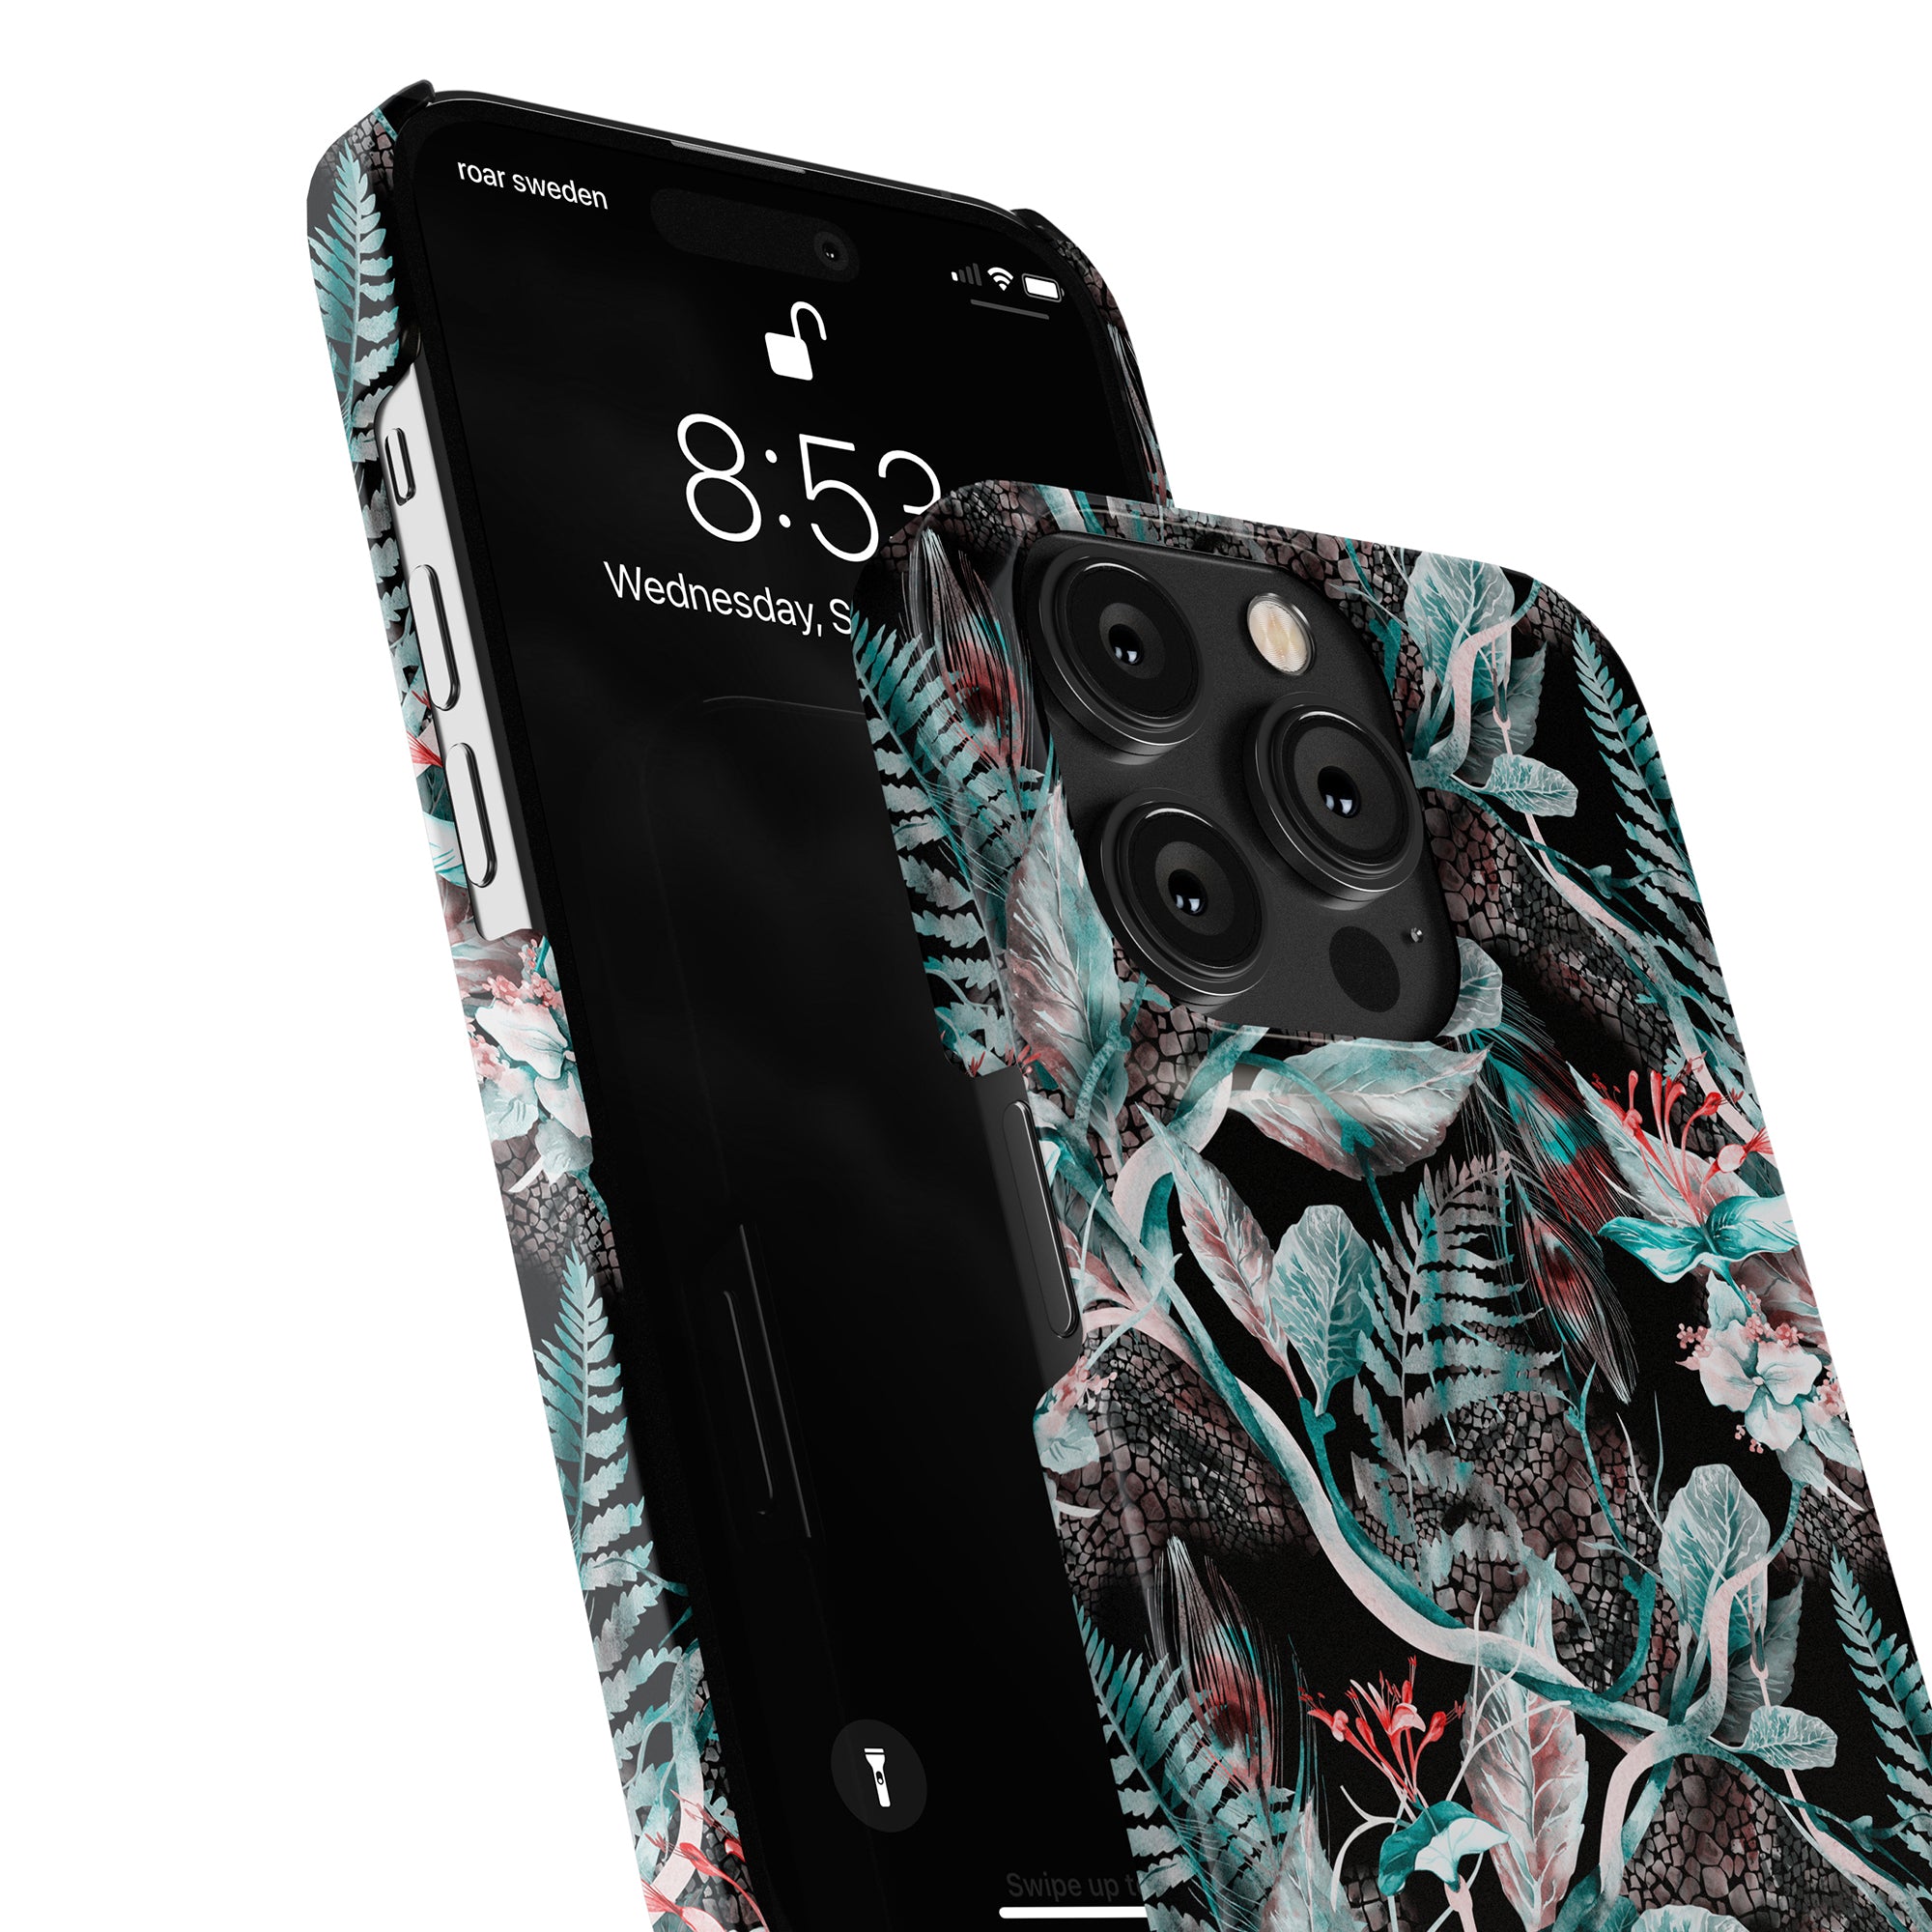 A Snake Jungle - Slim case with a unique and trendy look. The case features a jungle pattern with snake skin motif, providing high-quality and durable protection against scratches, impacts, and dirt. It